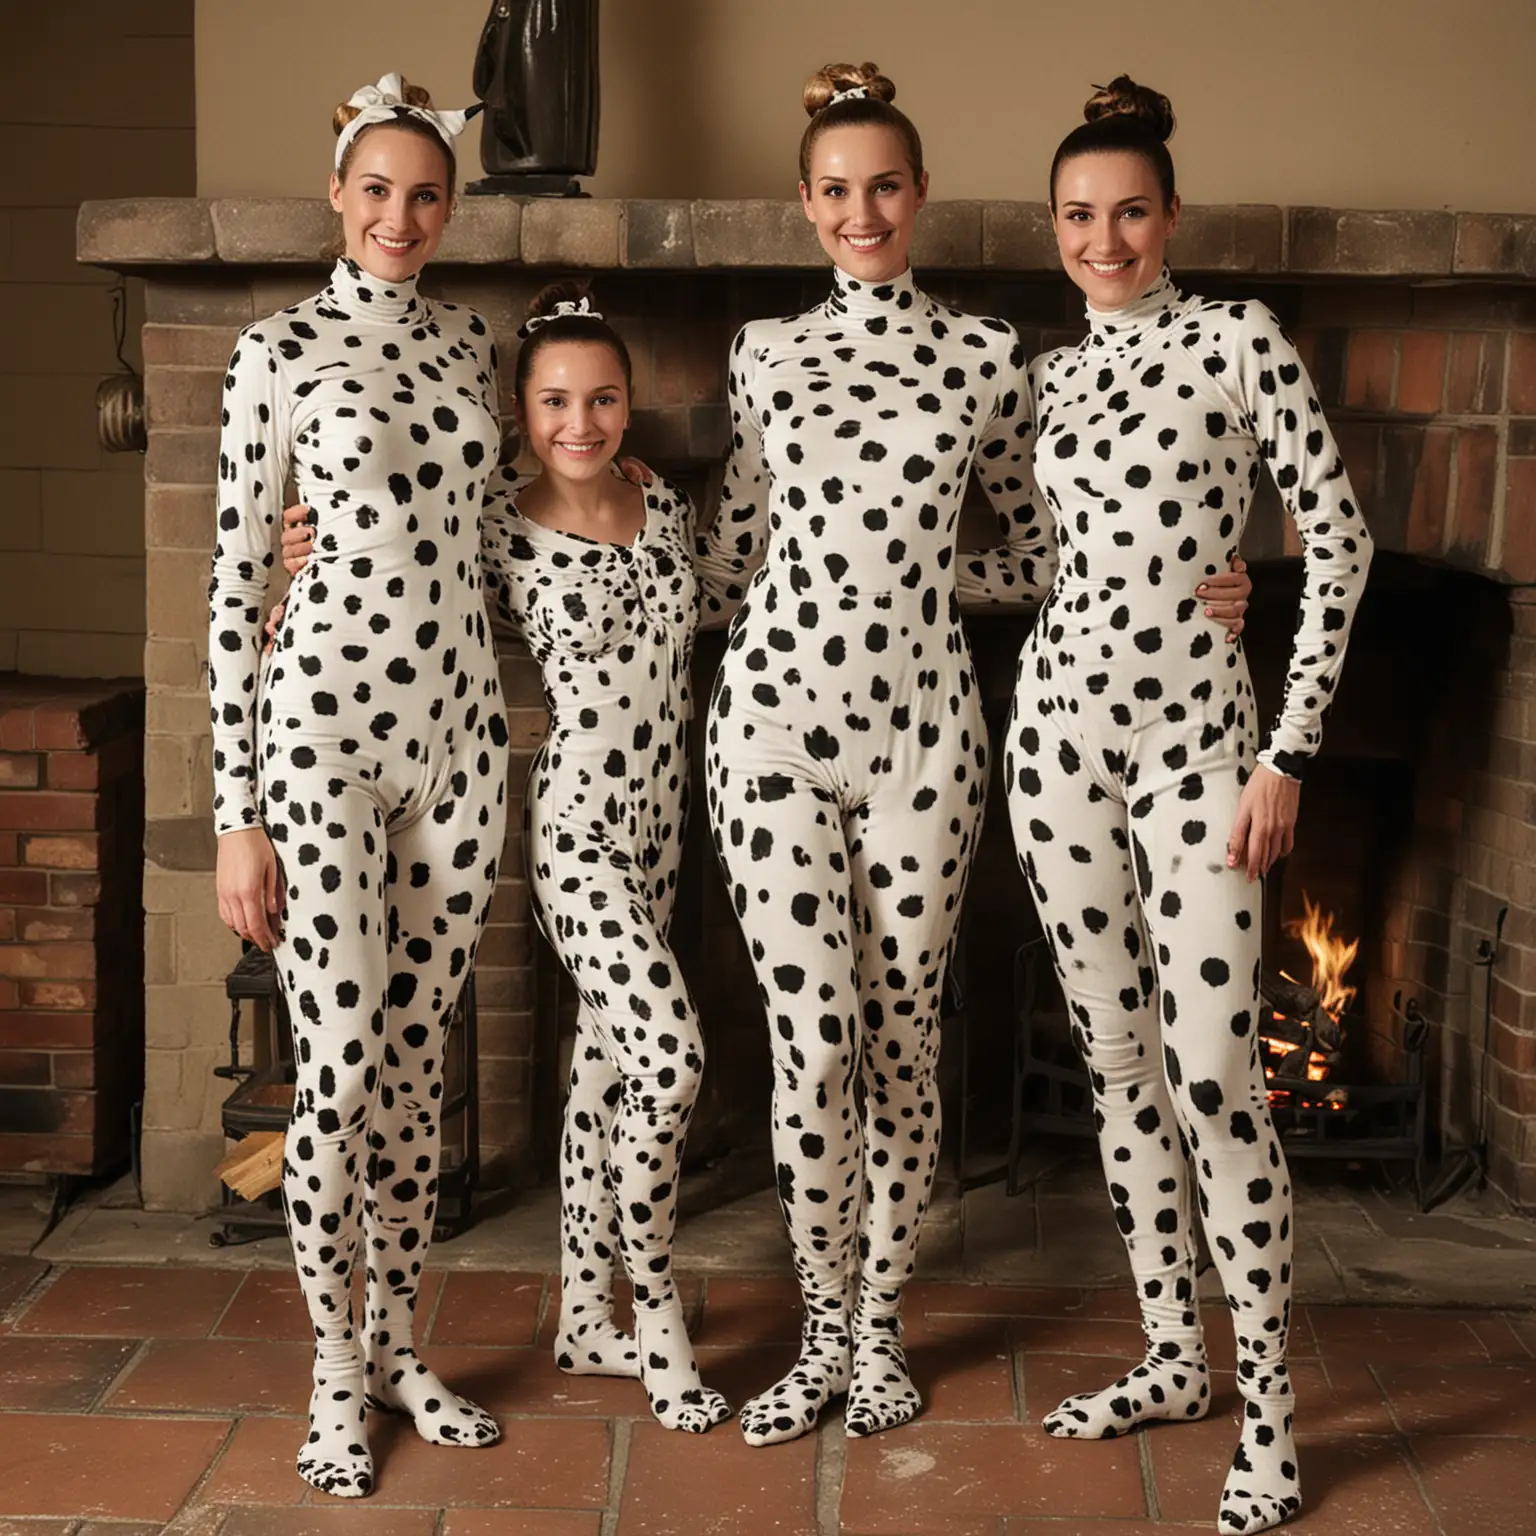 Three-Slim-Women-in-Dalmatian-Costumes-Smiling-by-Fireplace